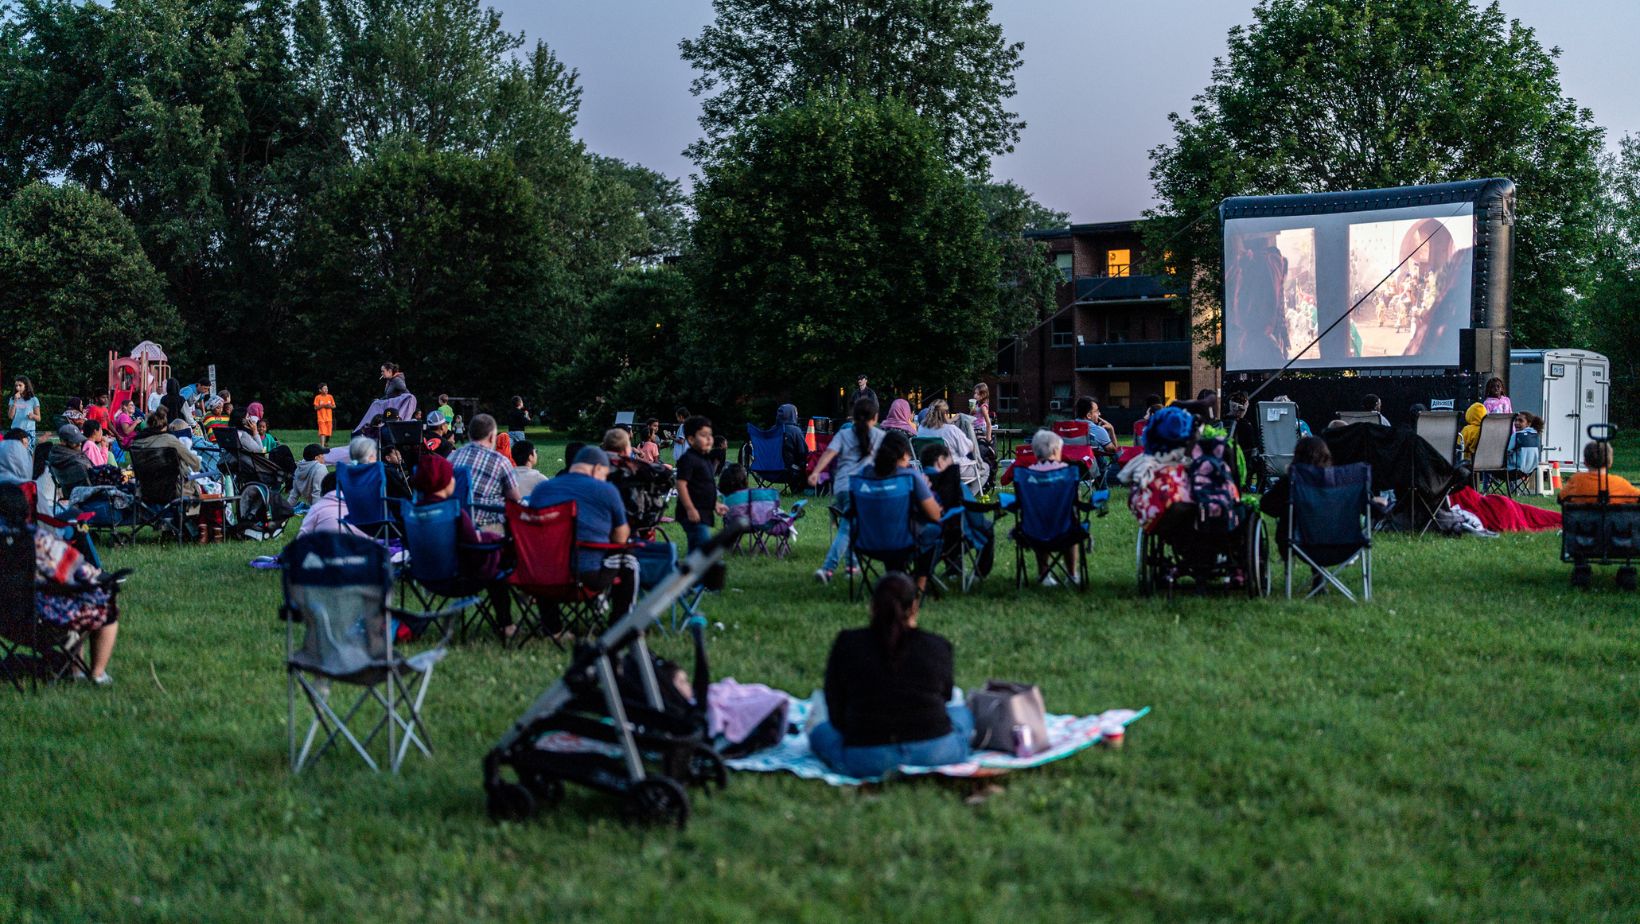 People watching a movie outdoors on an inflatable screen